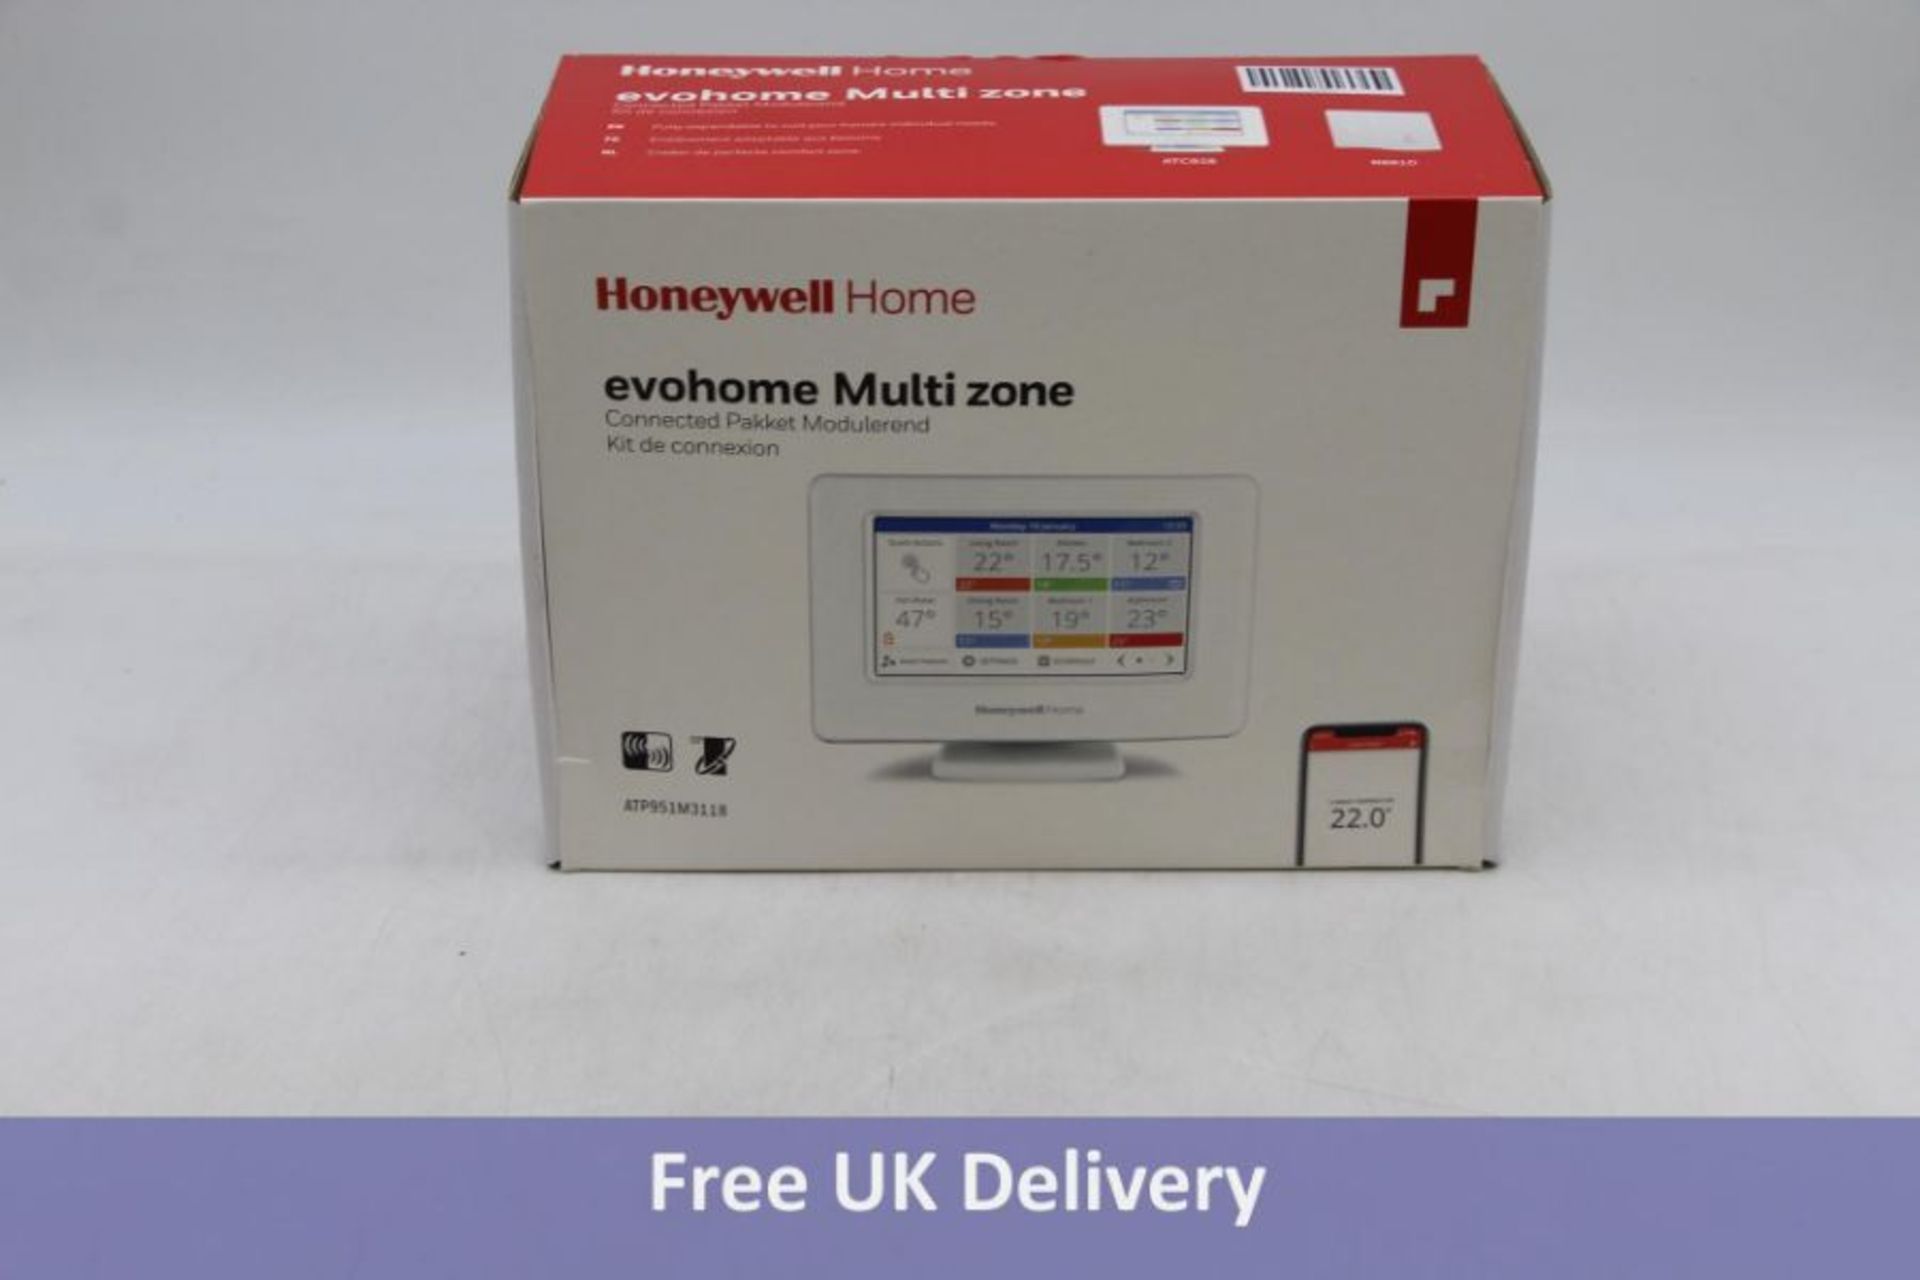 Honeywell Home Evohome Connected, Modulation Pack